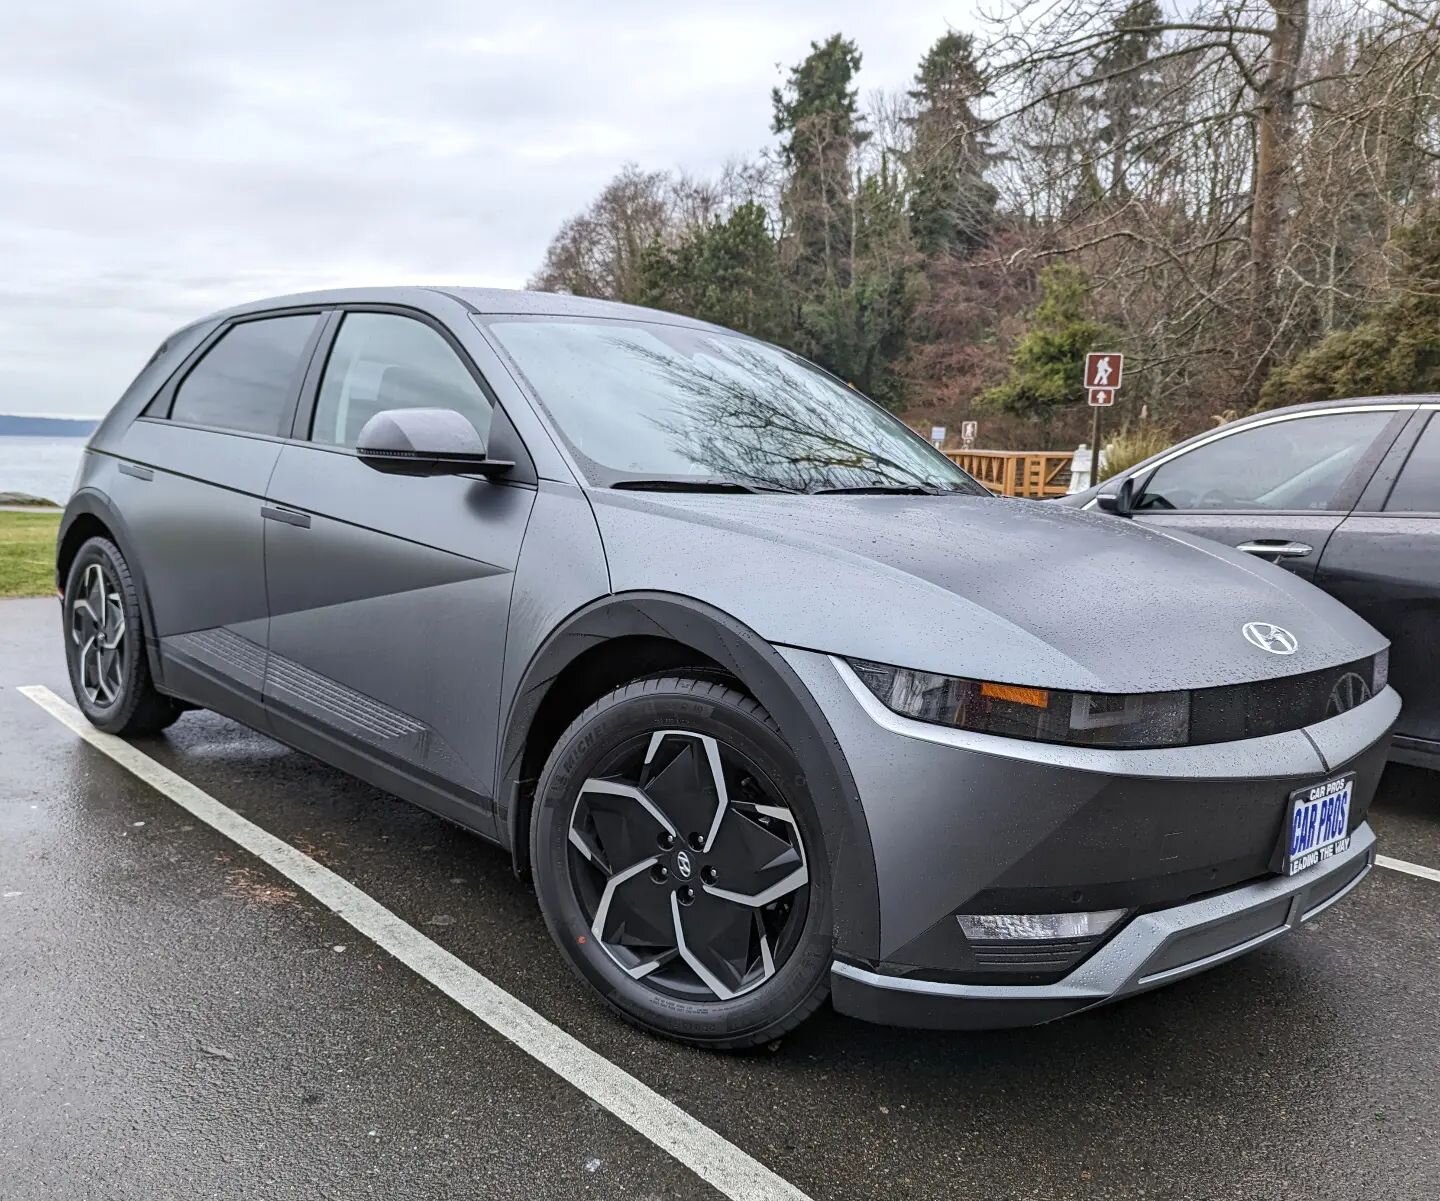 We have been so busy with medical stuff that we have not had a chance to introduce you to the newest member of our electric fleet!

George has been looking at this car since the middle of last season!  It is the Hyundai Ioniq 5 - all electric vehicle